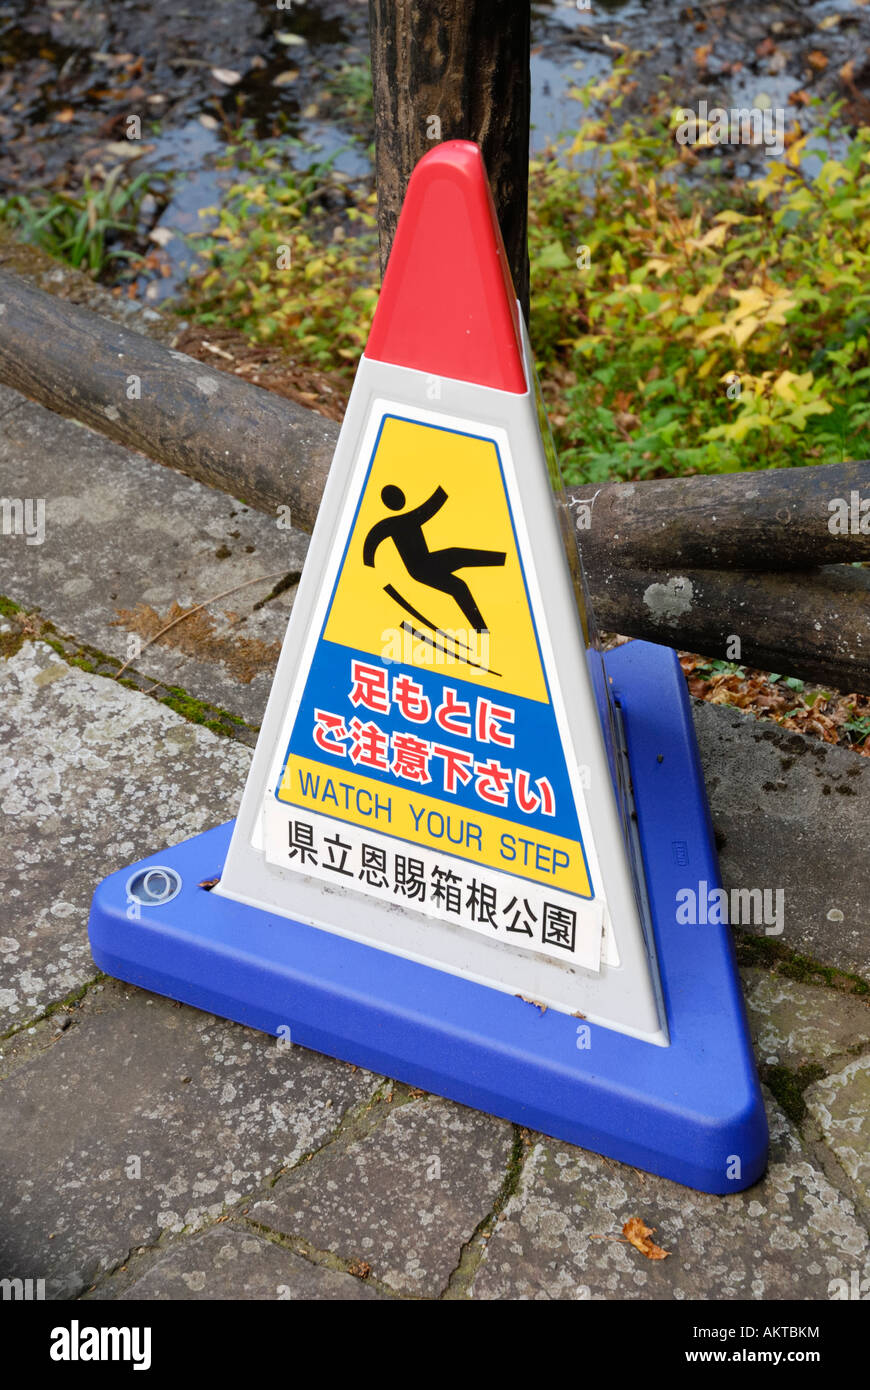 Watch Your Step (Japanese) Stock Photo